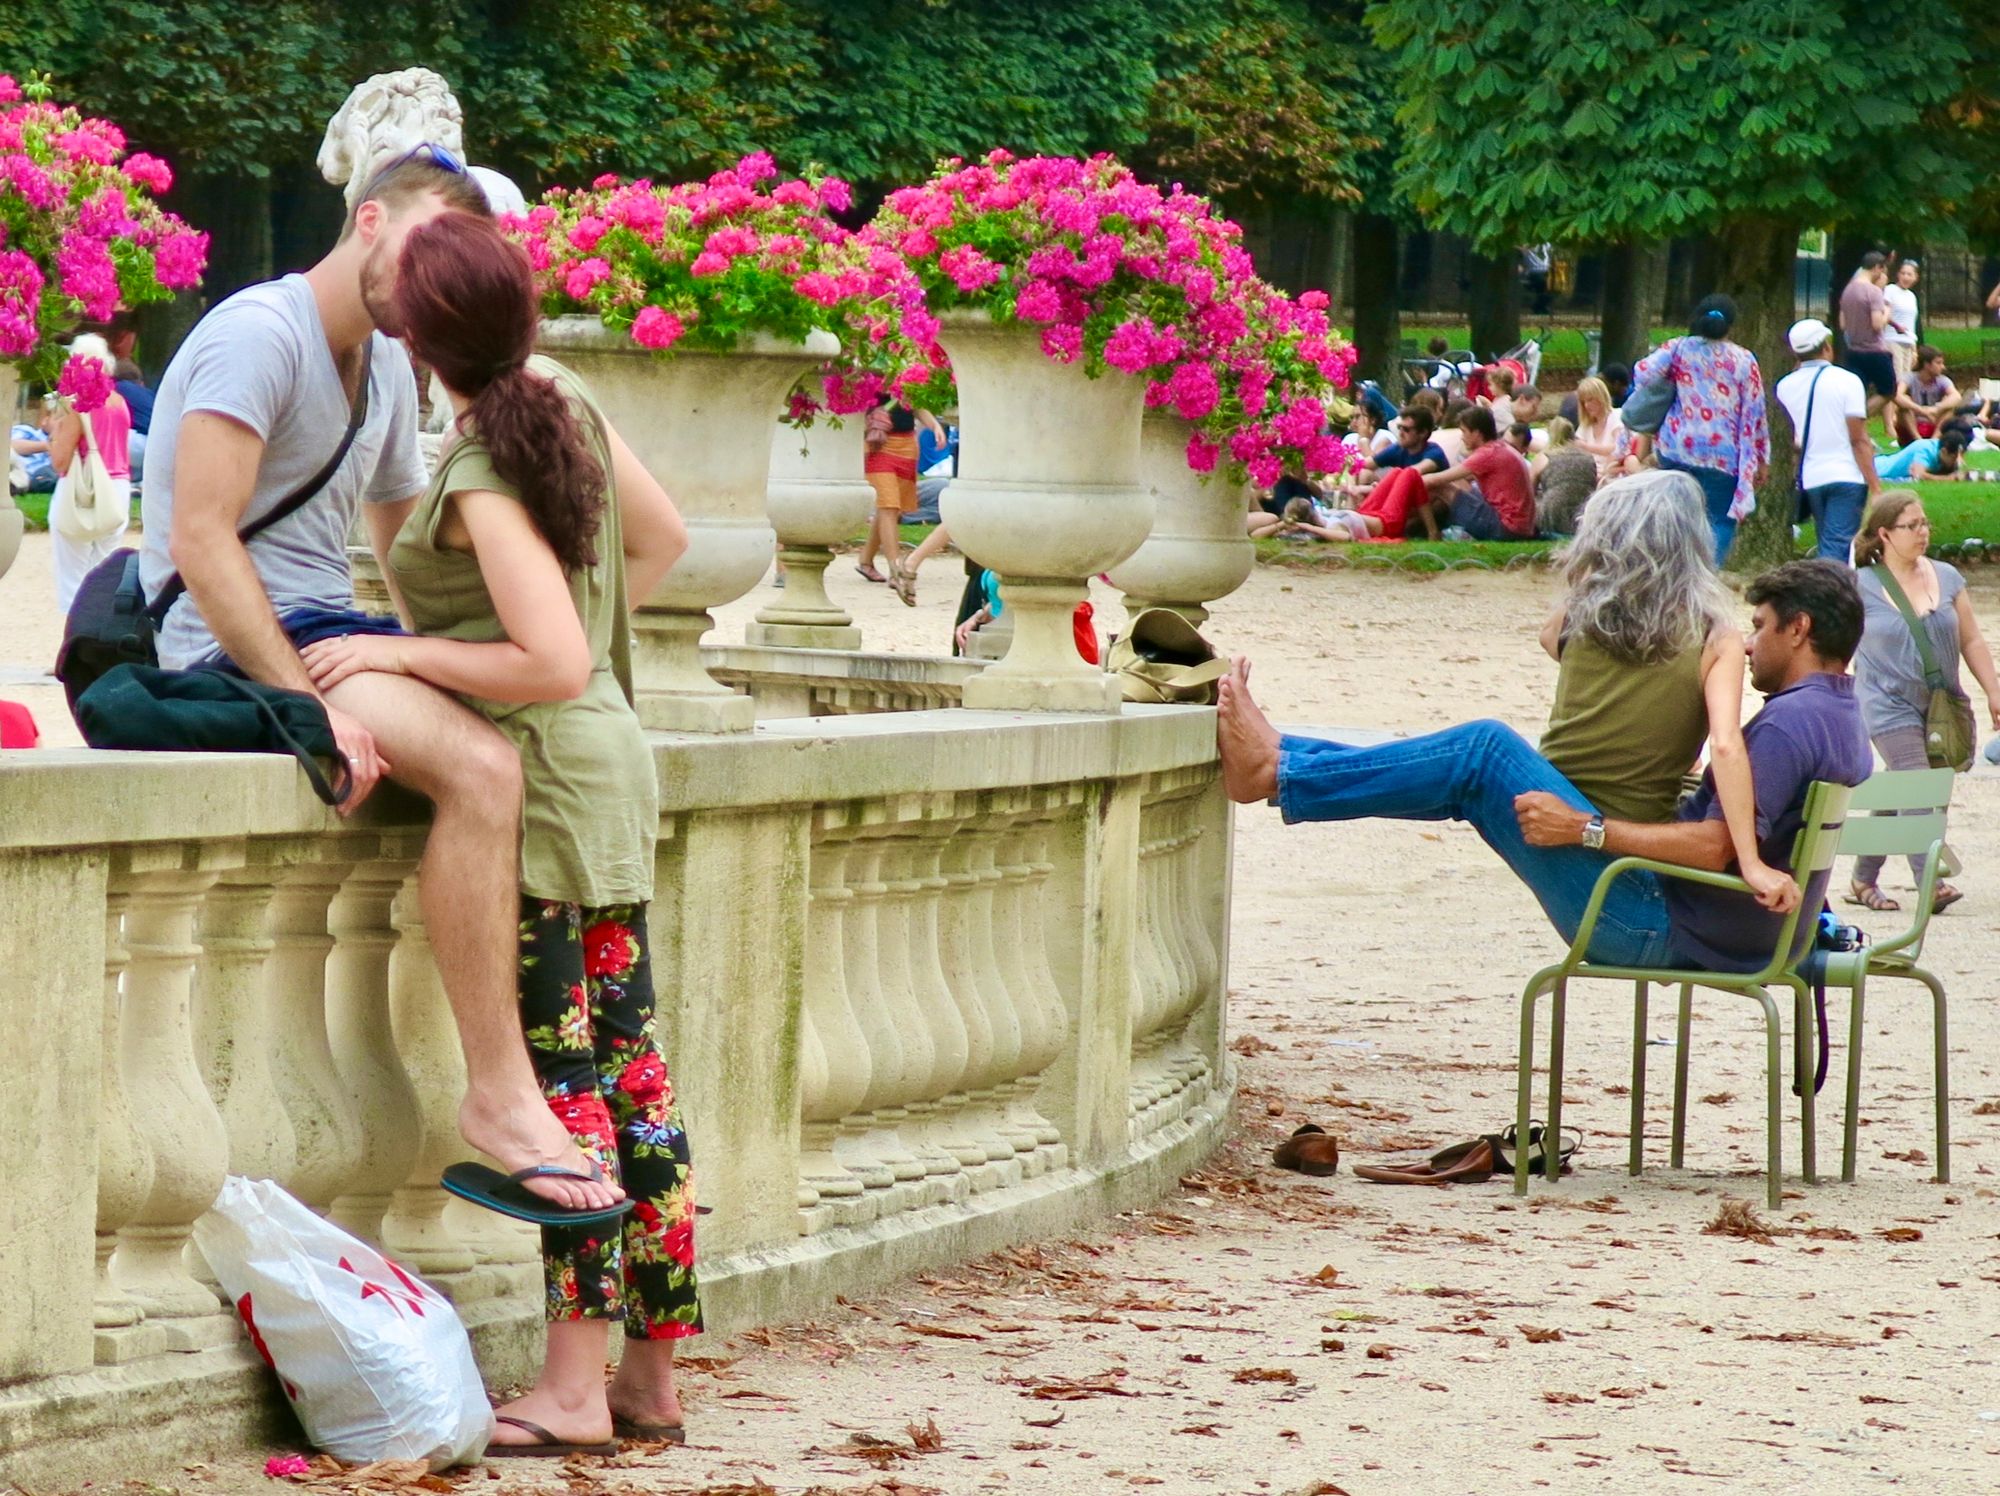 Paris: What The City of Love Can Teach Us About Creating Spaces for Love